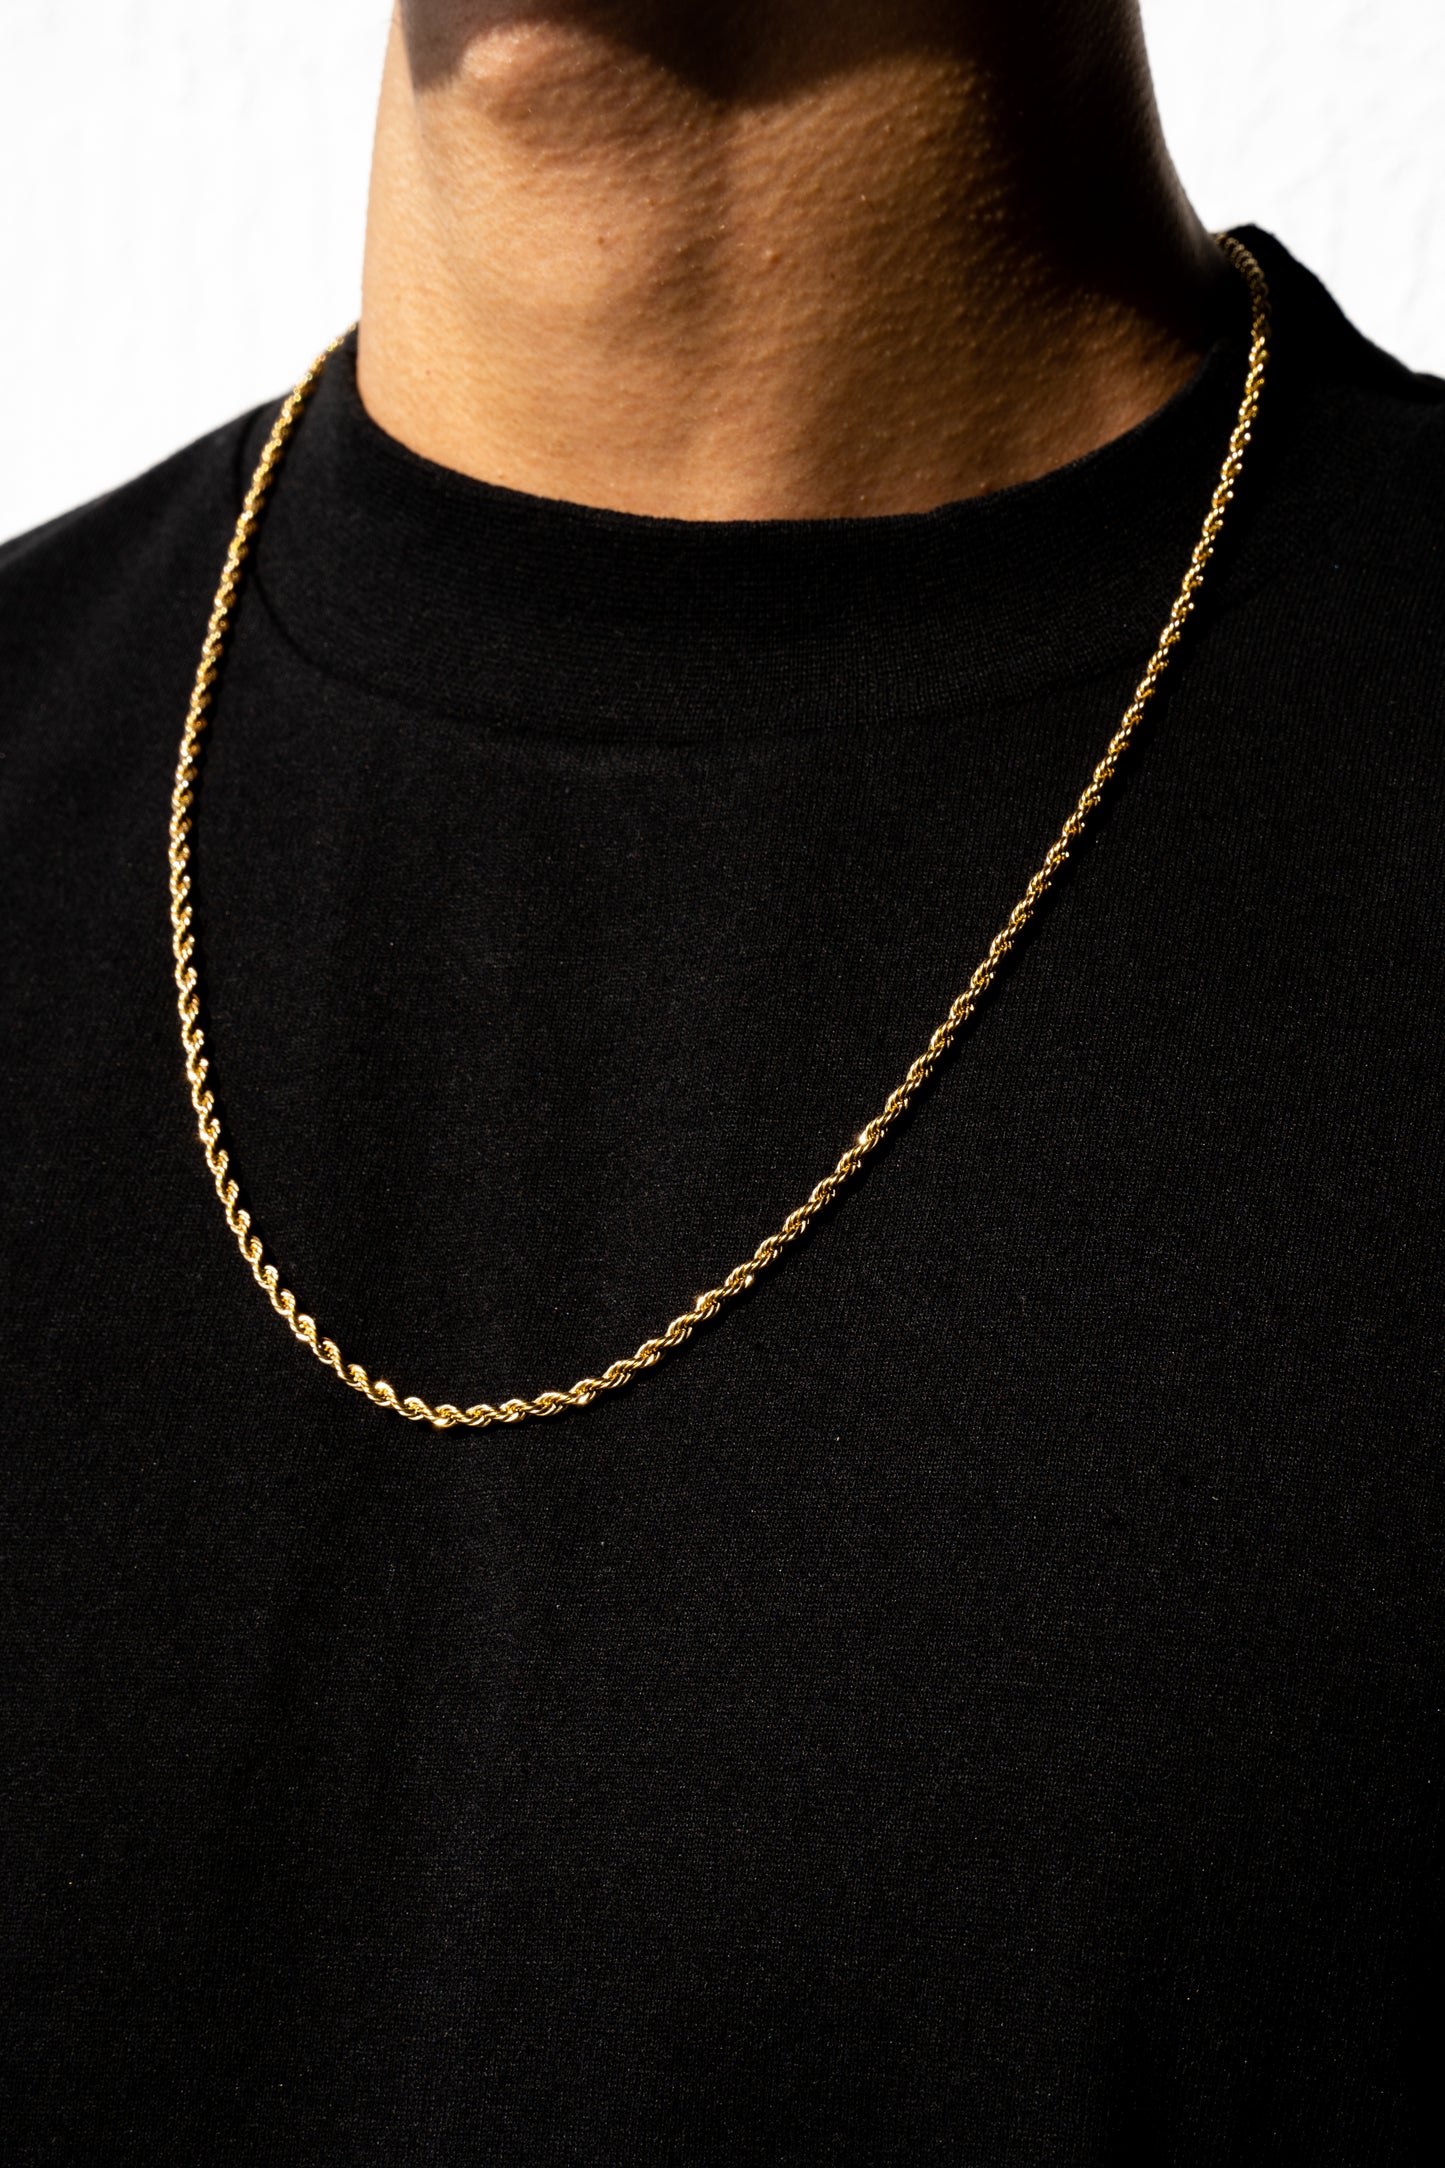 Harrington Necklace in Gold - 3mm